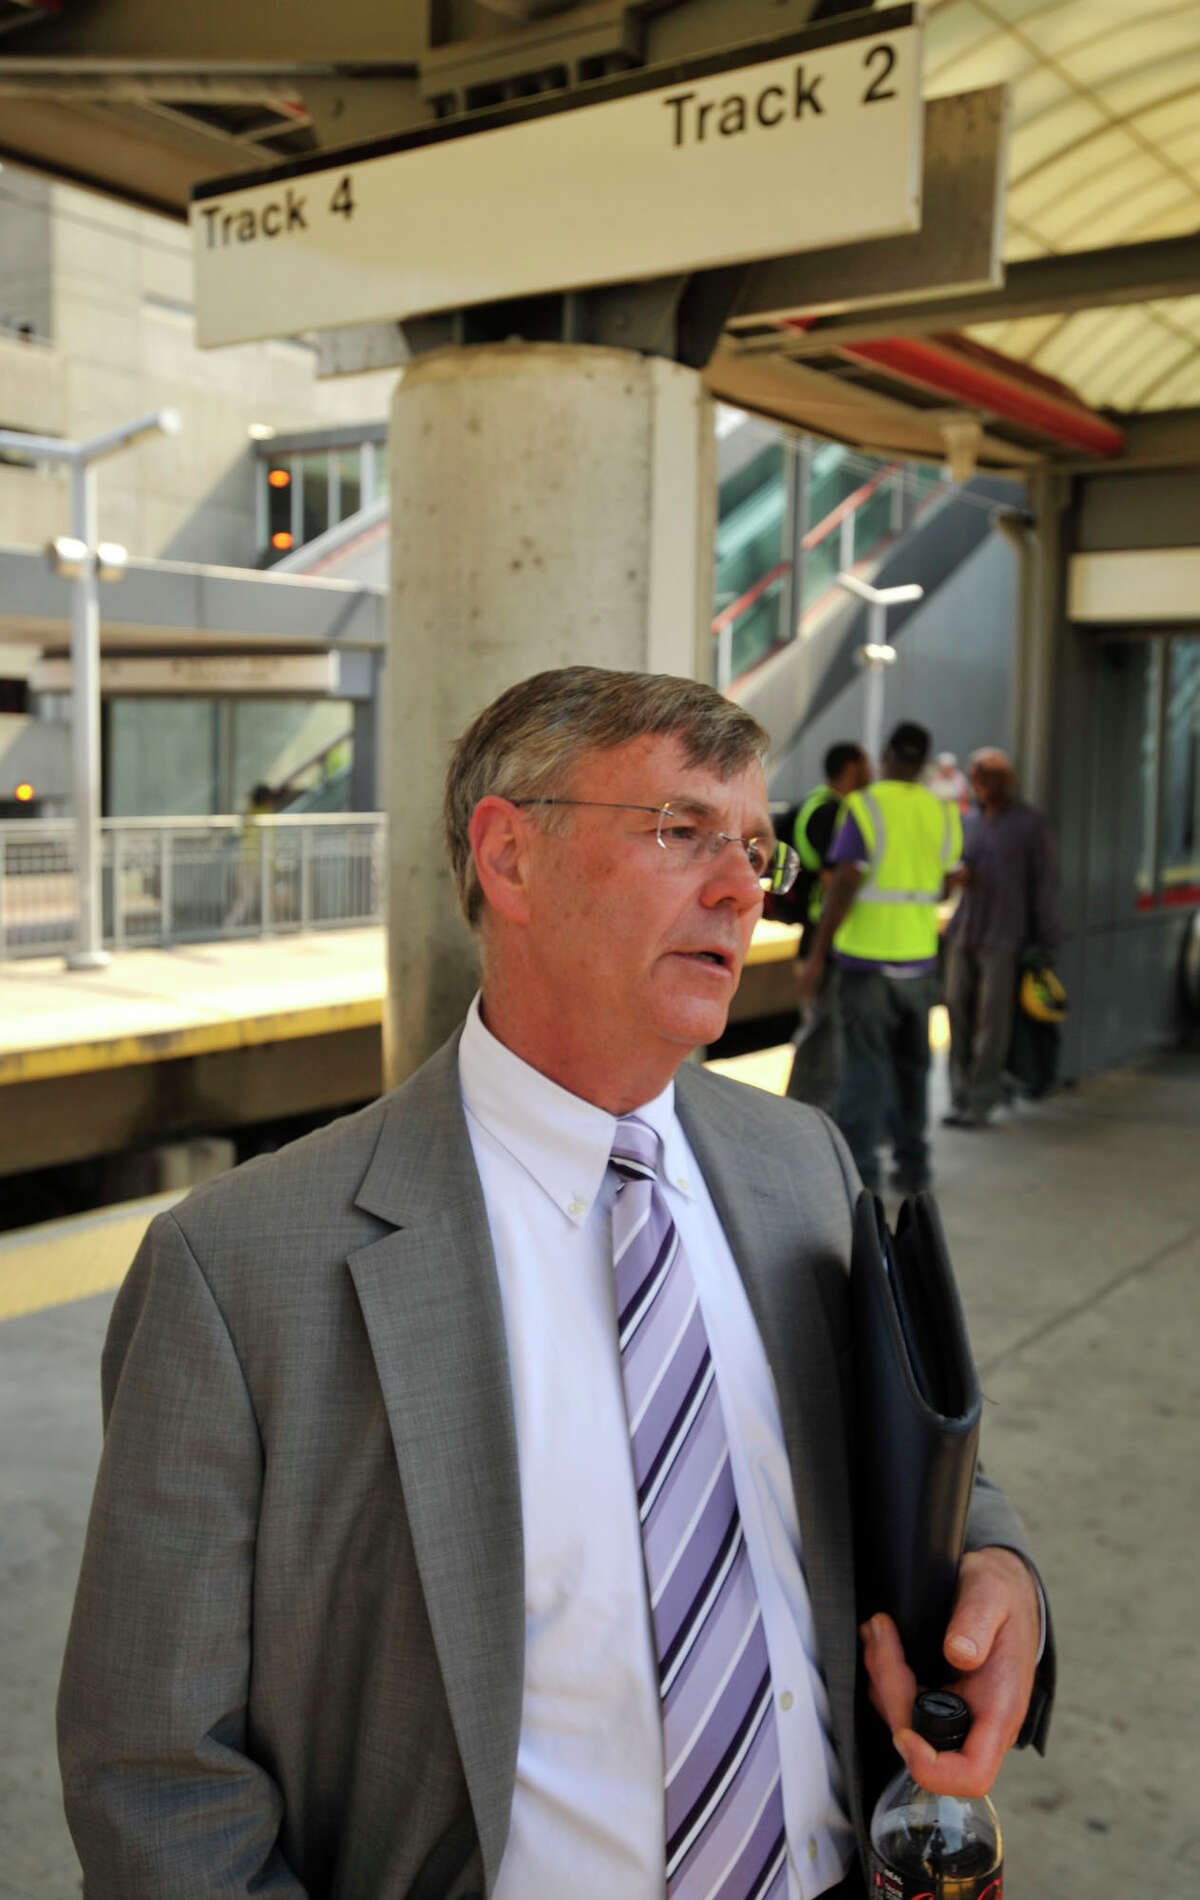 James Redeker, commissioner of the Connecticut Department of Transportation at the Stamford train station on Tuesday, May 21, 2013. Redeker, is tentatively scheduled to speak before the city's land use boards on Tuesday, Jan. 27 about its proposed $500 million redevelopment plan for Stamford's downtown train station.